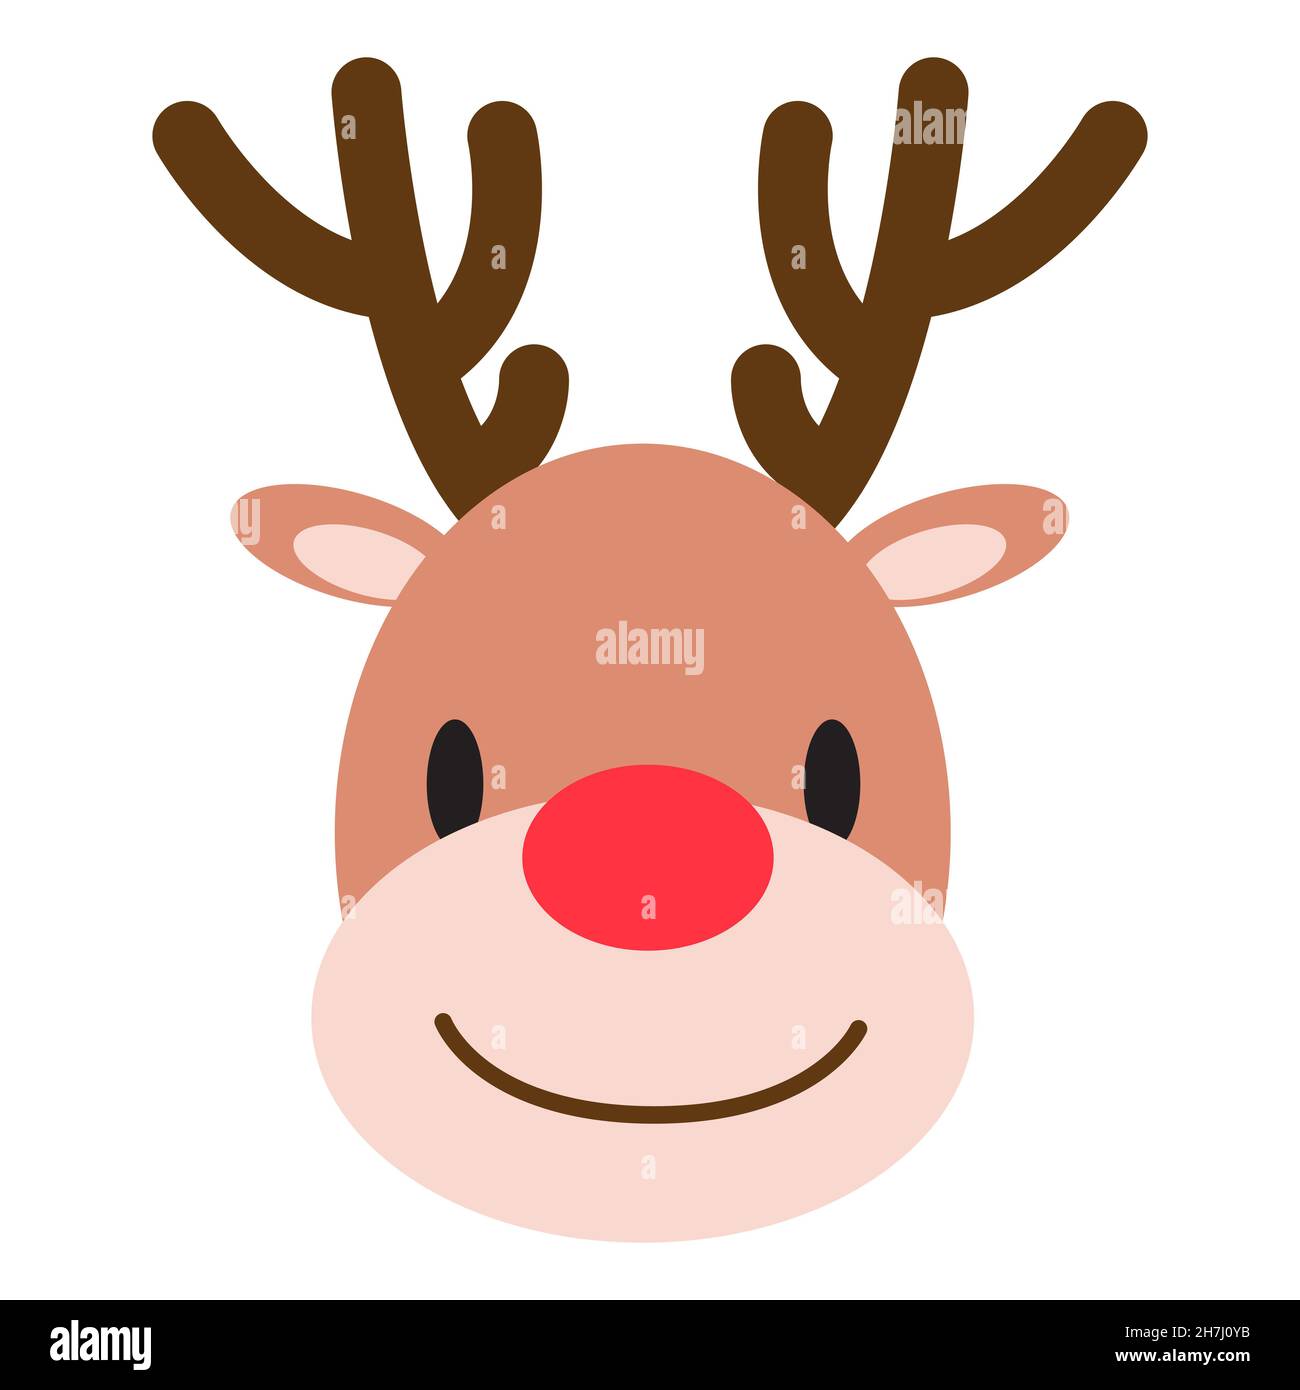 Funny cartoon reindeer face. Santas helper. Christmas and New Year decor. Deer with big red nose. Smiling winter animal. Print for sticker, gift wrap, Stock Vector